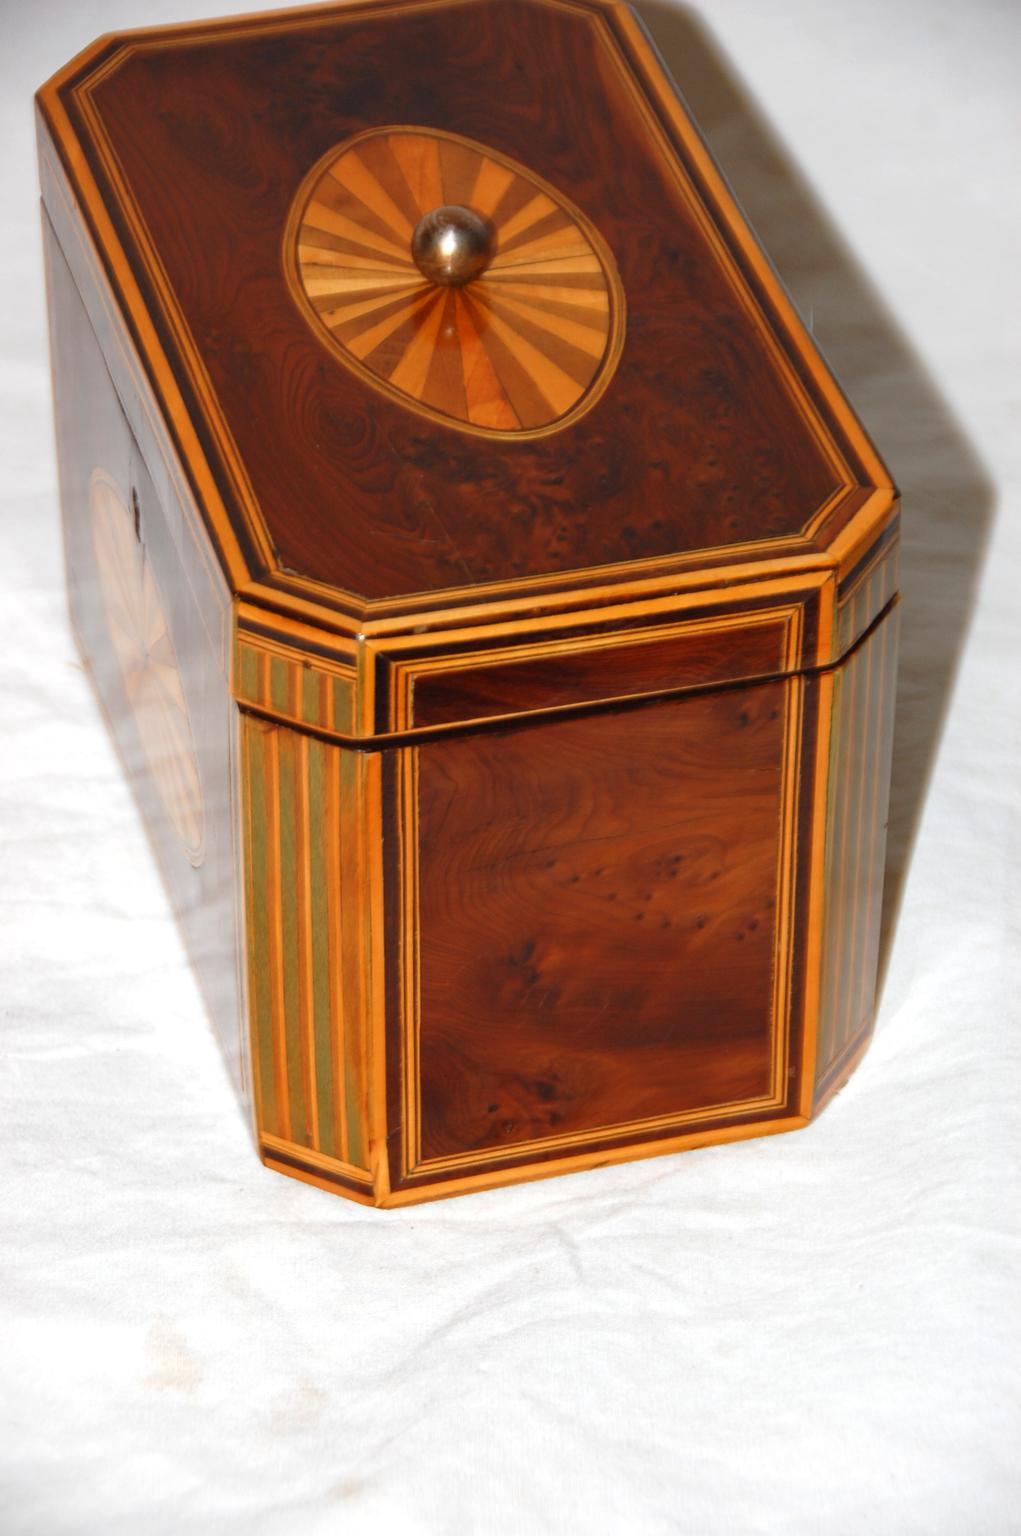 English Georgian Period Yew Wood Octagonal Tea Caddy with Fan and Column Inlays For Sale 3